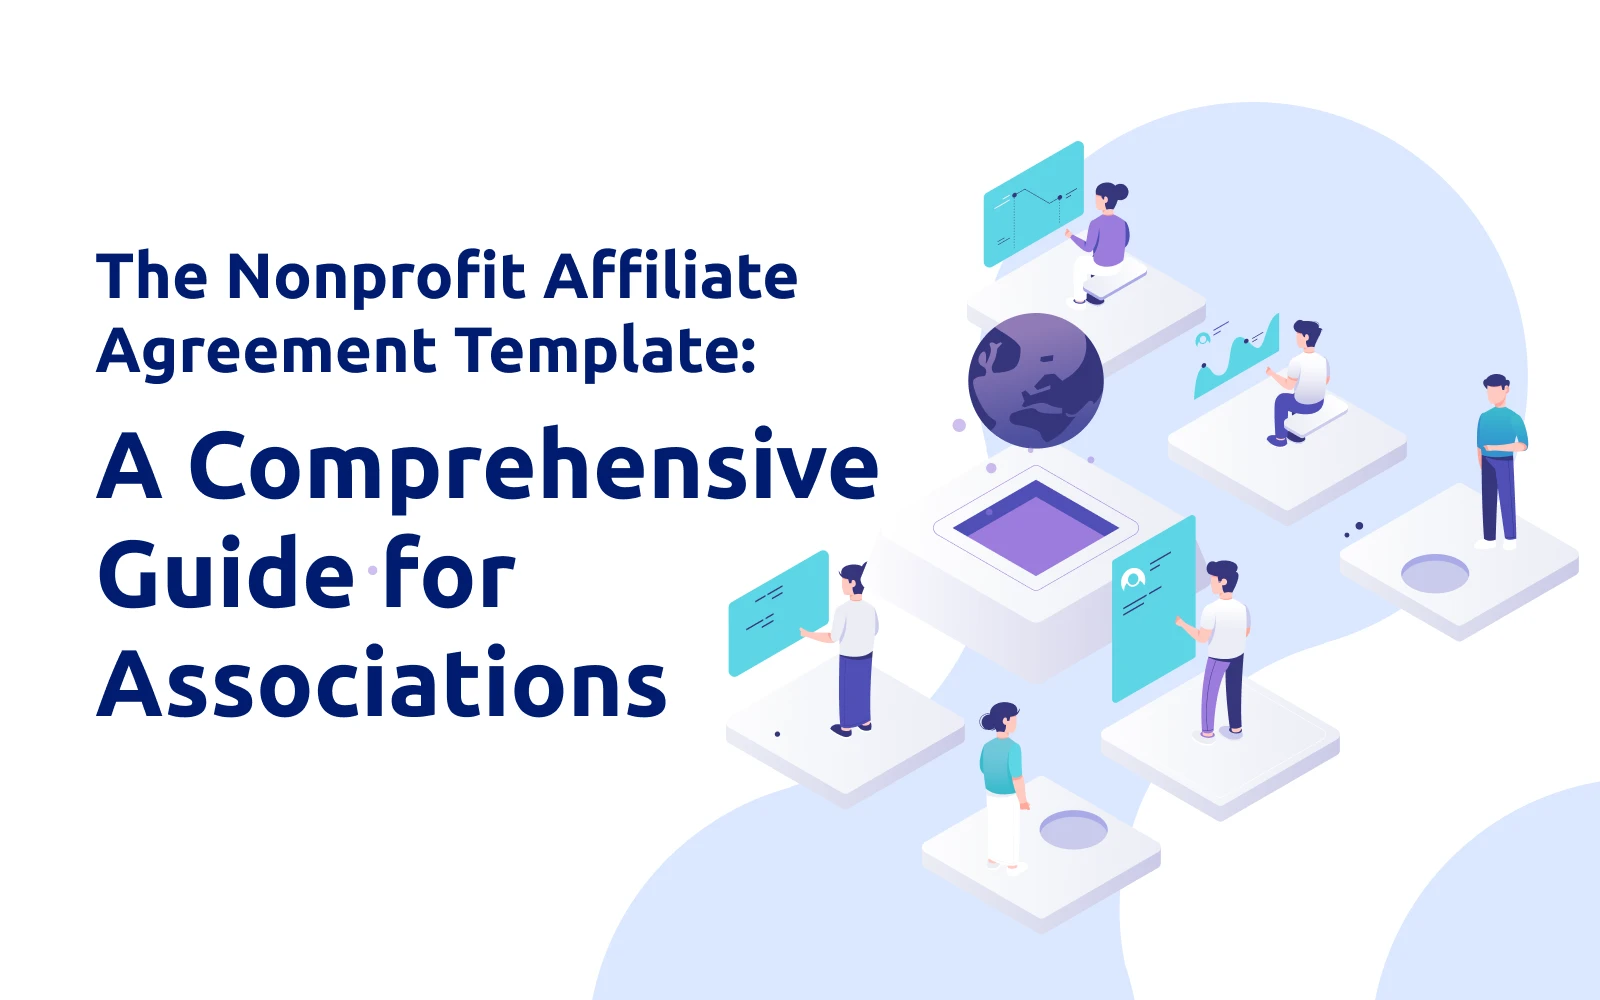 The Nonprofit Affiliate Agreement Template: A Comprehensive Guide for Associations